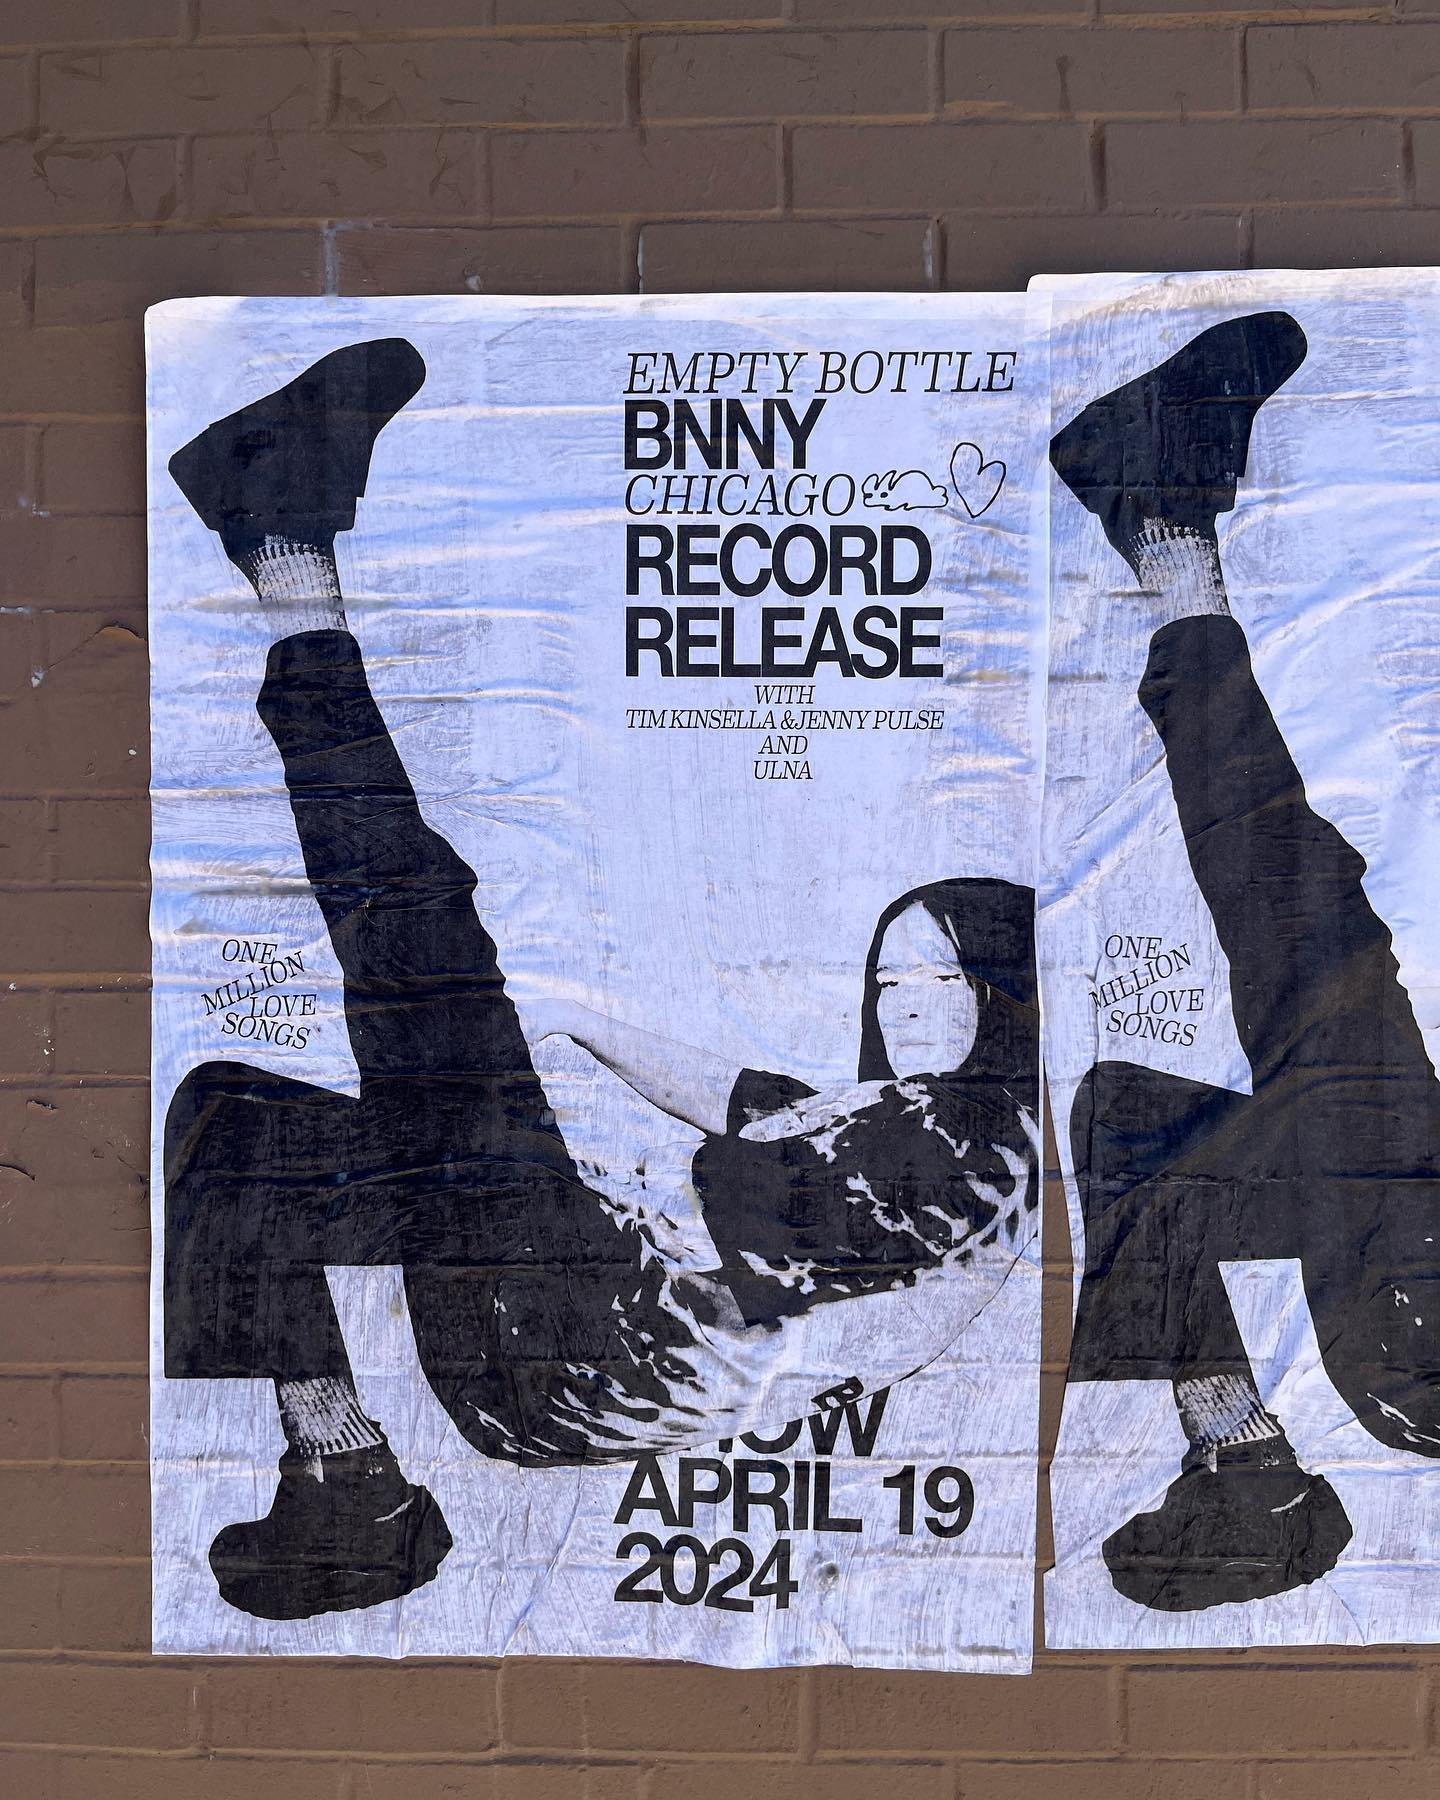 Chicago! Join us next Friday April 19th at THE @emptybottle to celebrate @bnnyband&rsquo;s new album &ldquo;One Million Love Songs&rdquo;, very limited tix remain, suggest copping in advance ❤️

The album is out digitally and streaming everywhere now